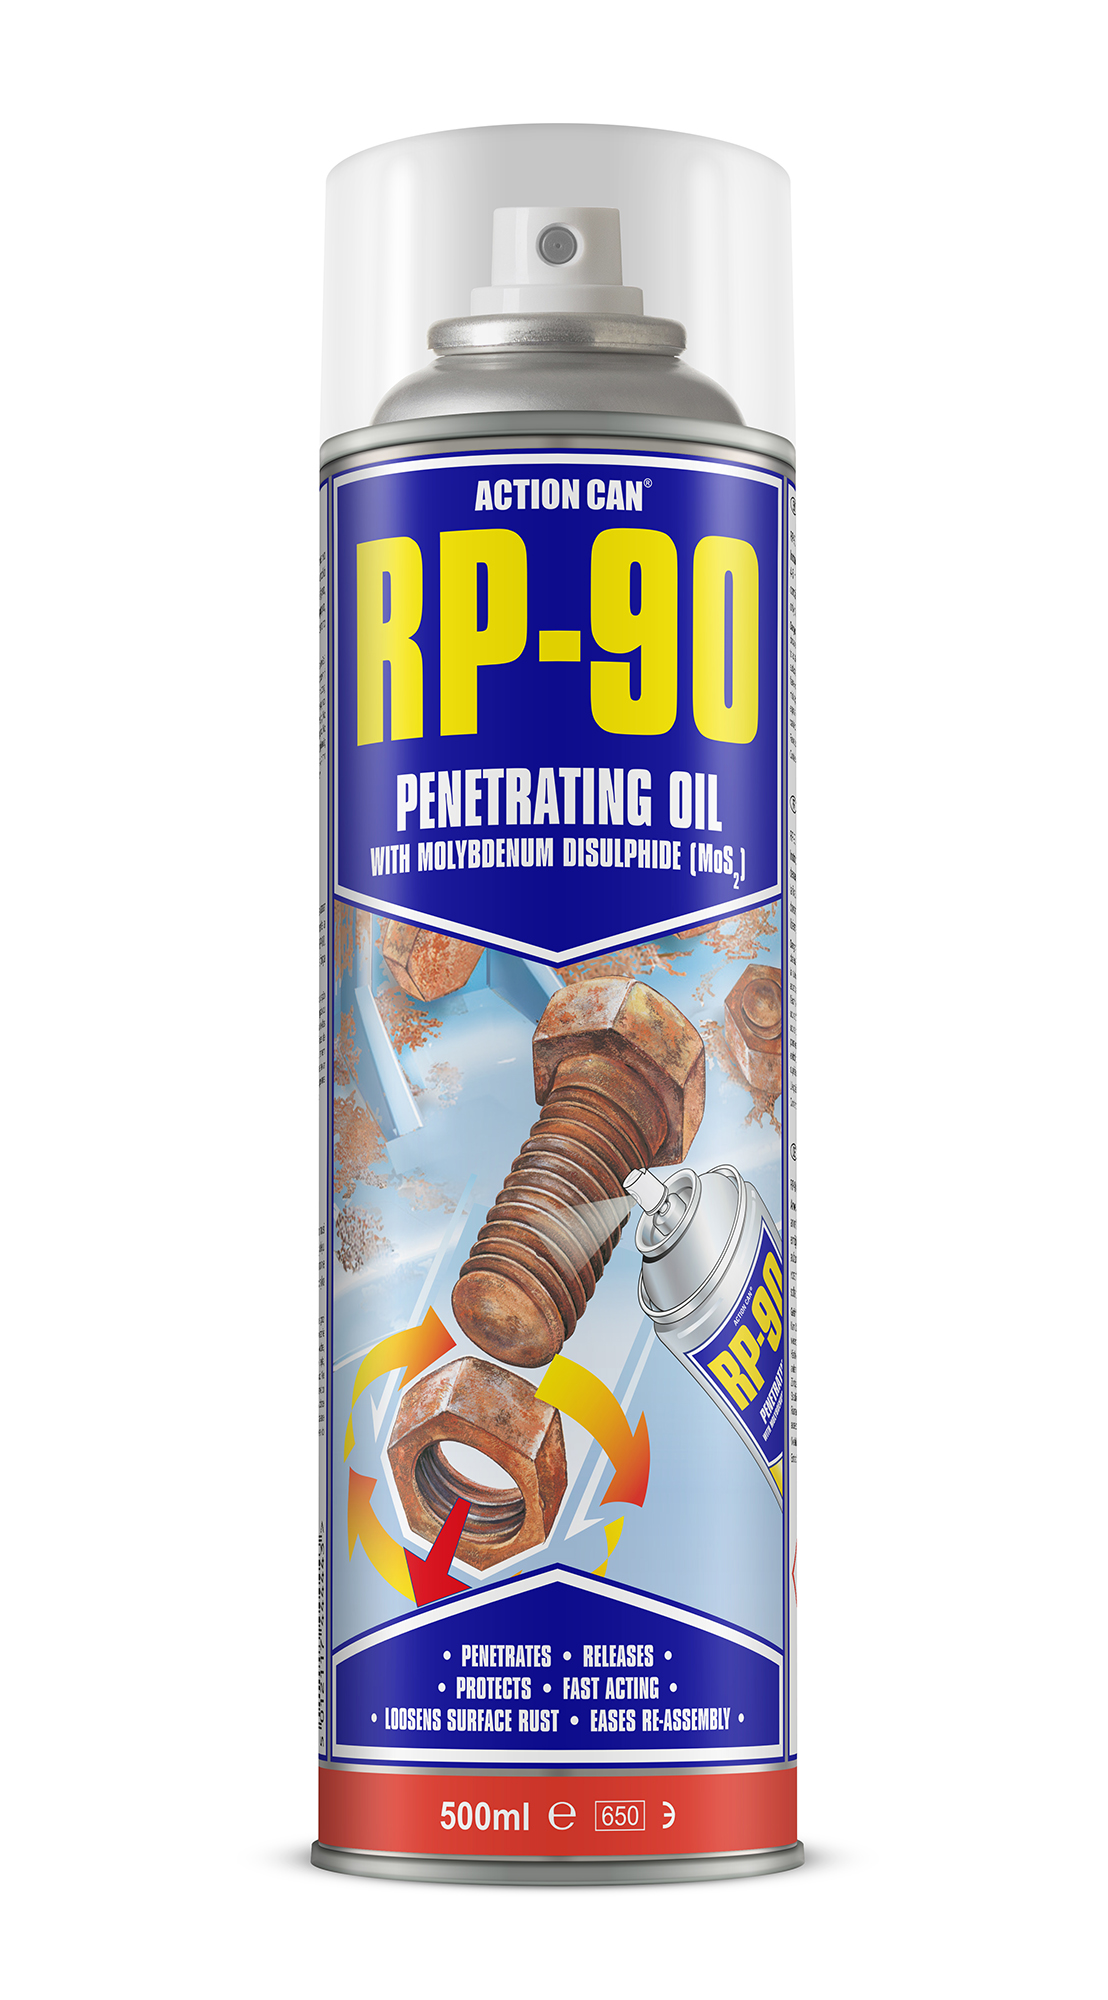 ACTION CAN RP-90 PENETRATING OIL